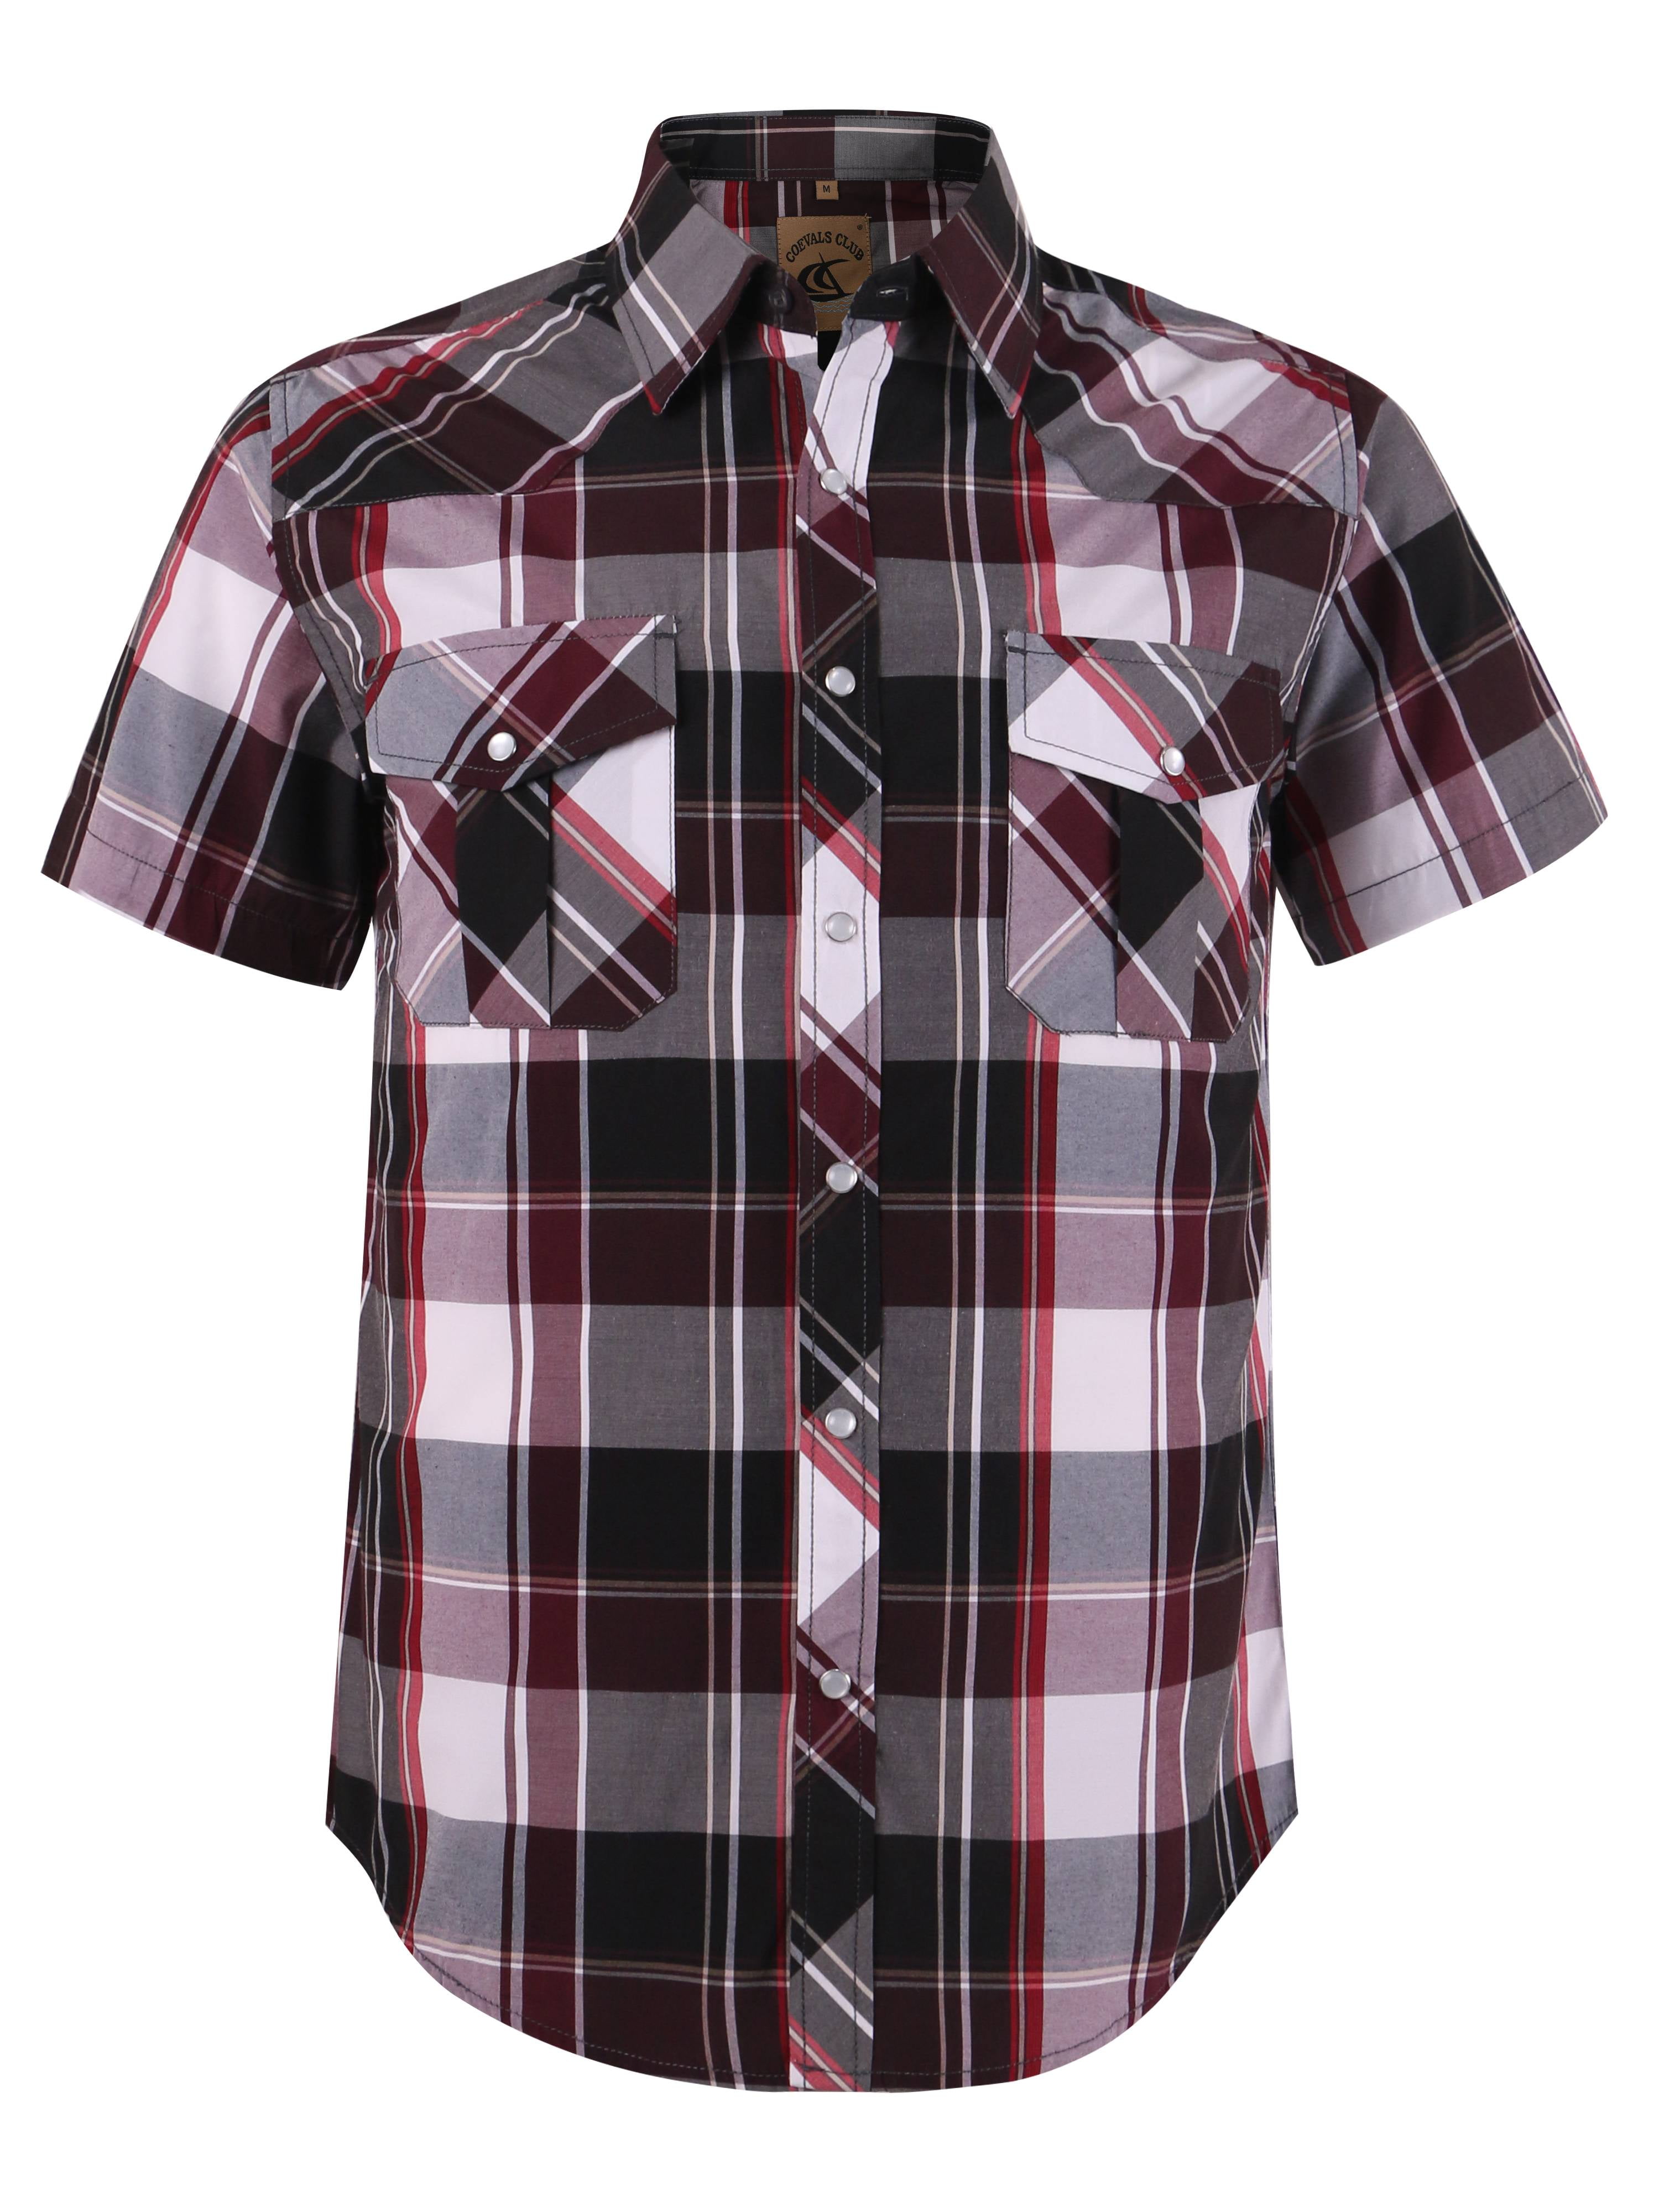 Coevals Club Men's Western Plaid Pearl Snap Short Sleeve Shirts (Red ...